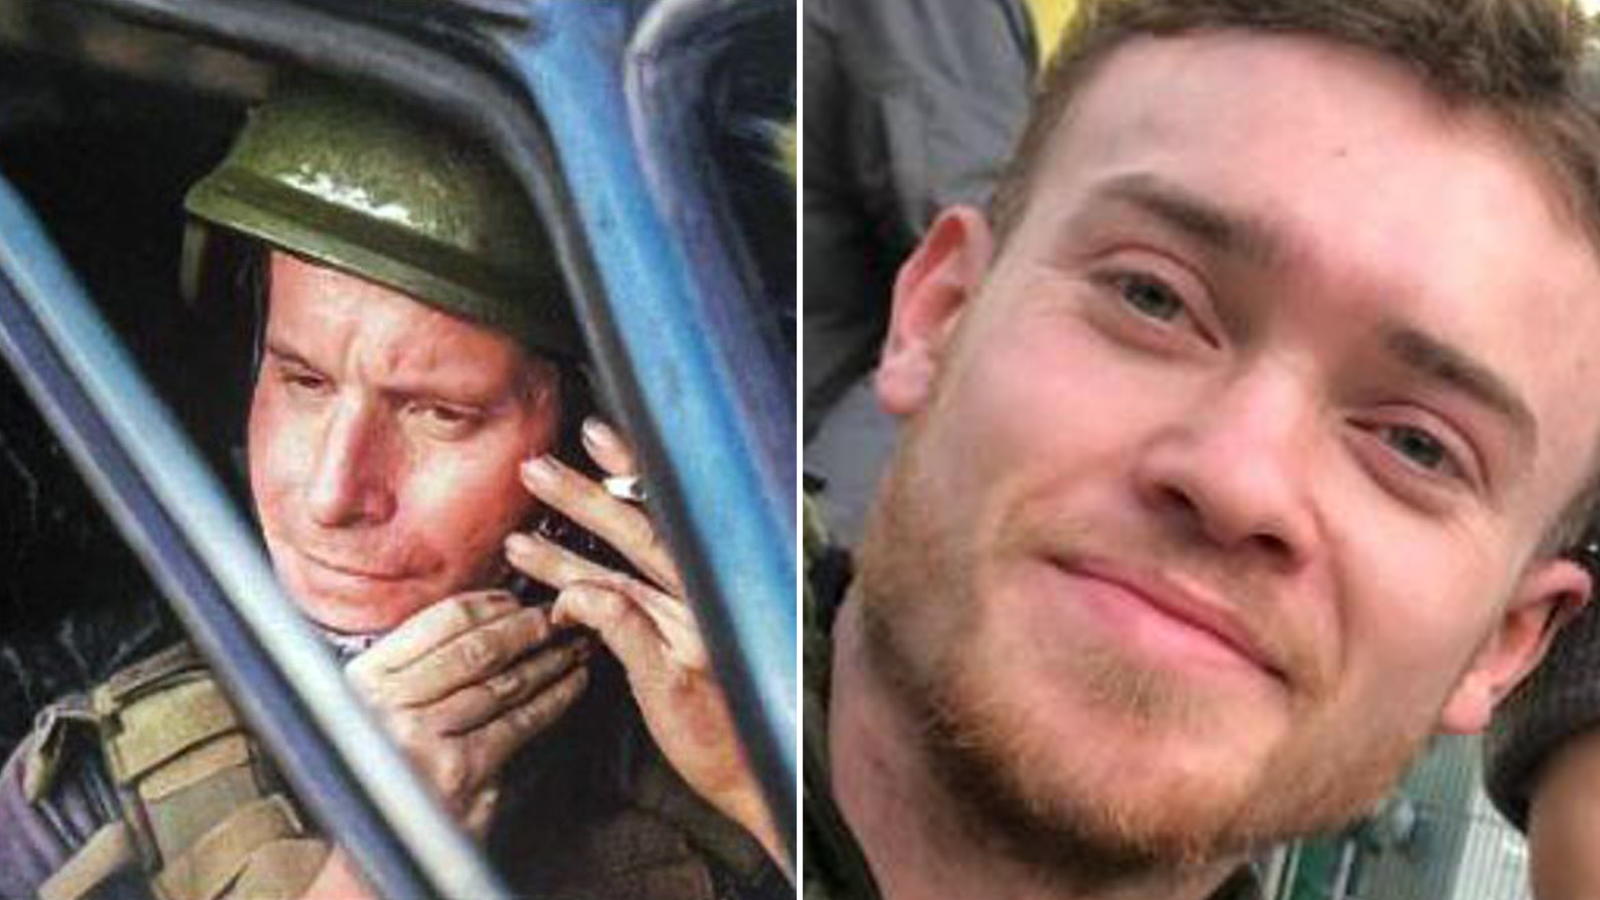 Chris Parry and Andrew Bagshaw: British nationals killed ‘attempting humanitarian evacuation from Soledar’, family statement says